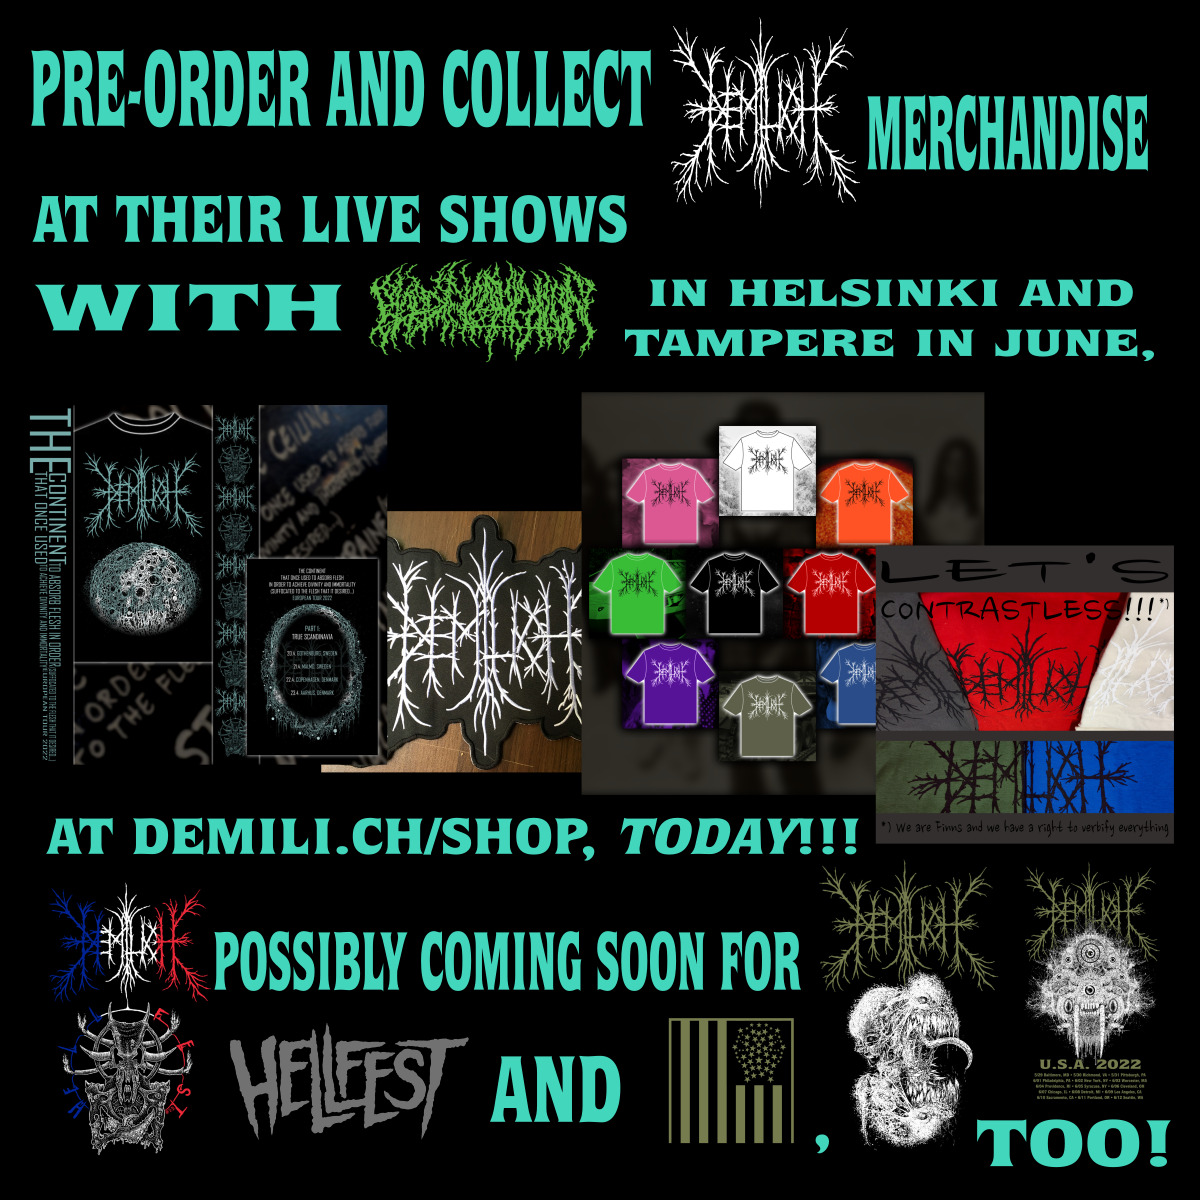 Pre-order and collect merchandise